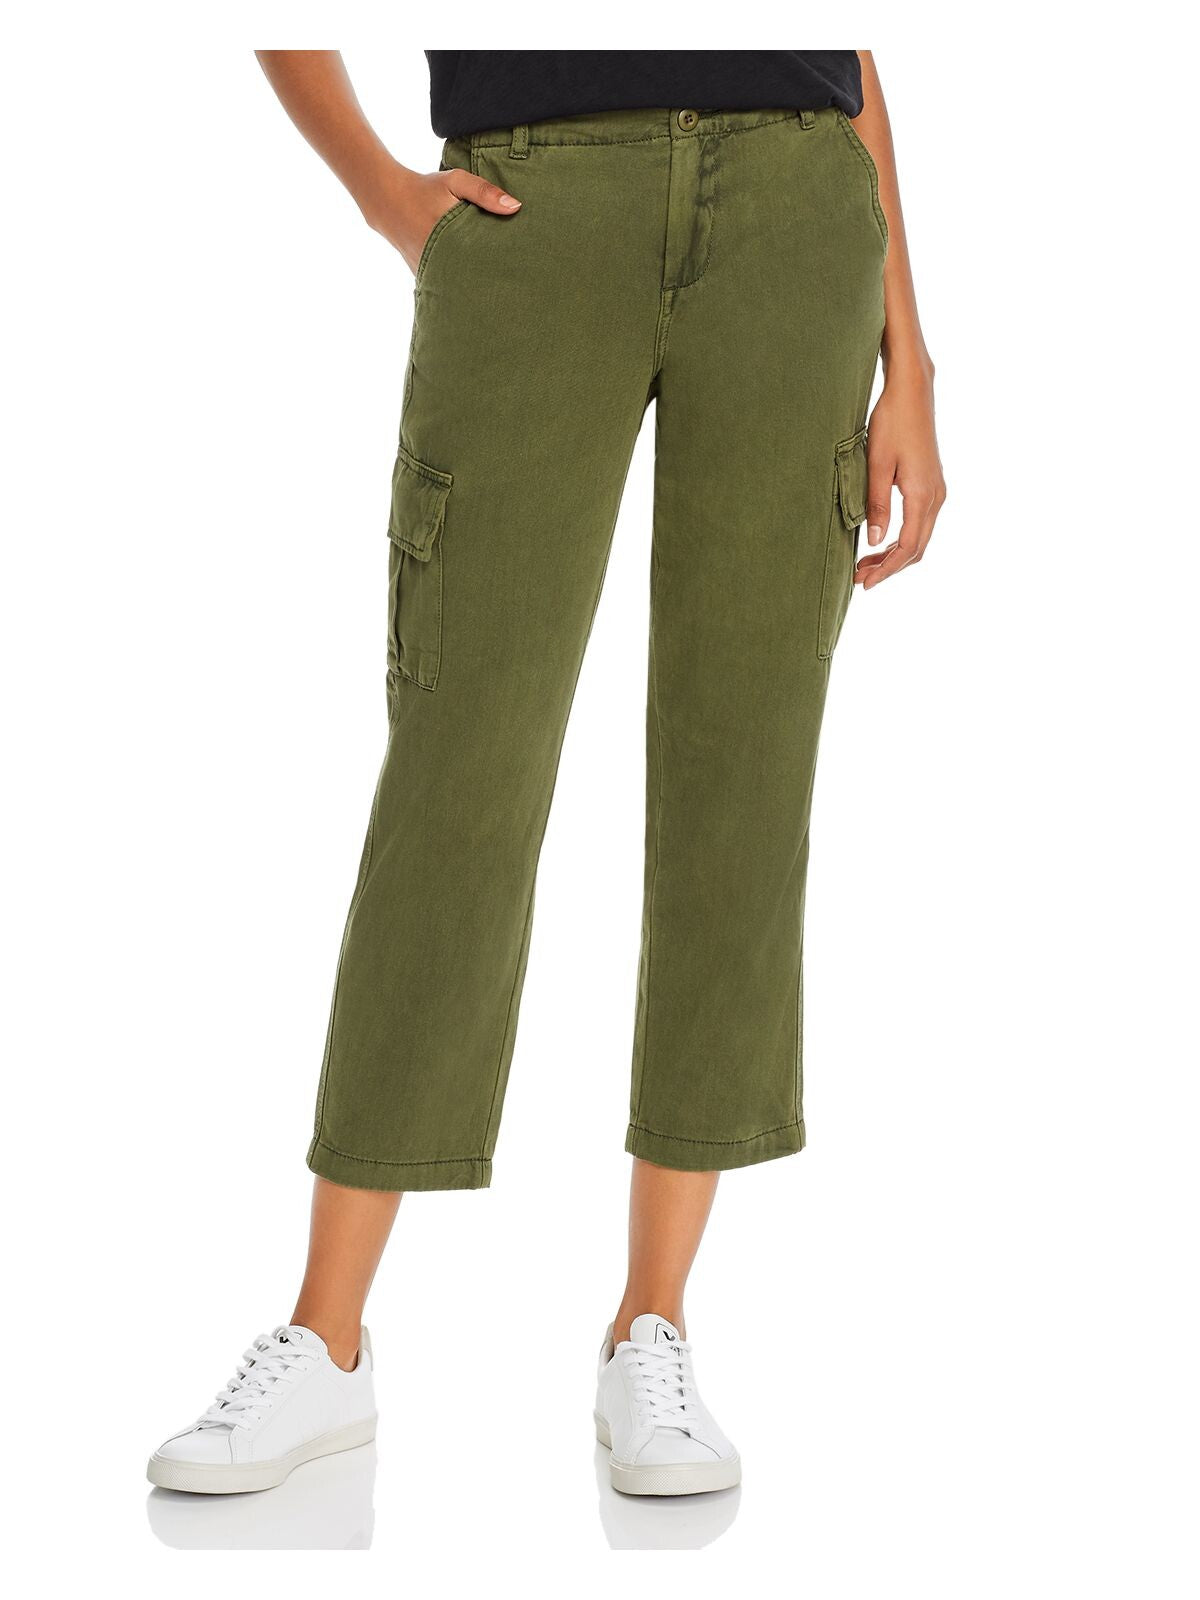 BLANK NYC Womens Green Pocketed Zippered Cropped Cargo Pants Size: 24